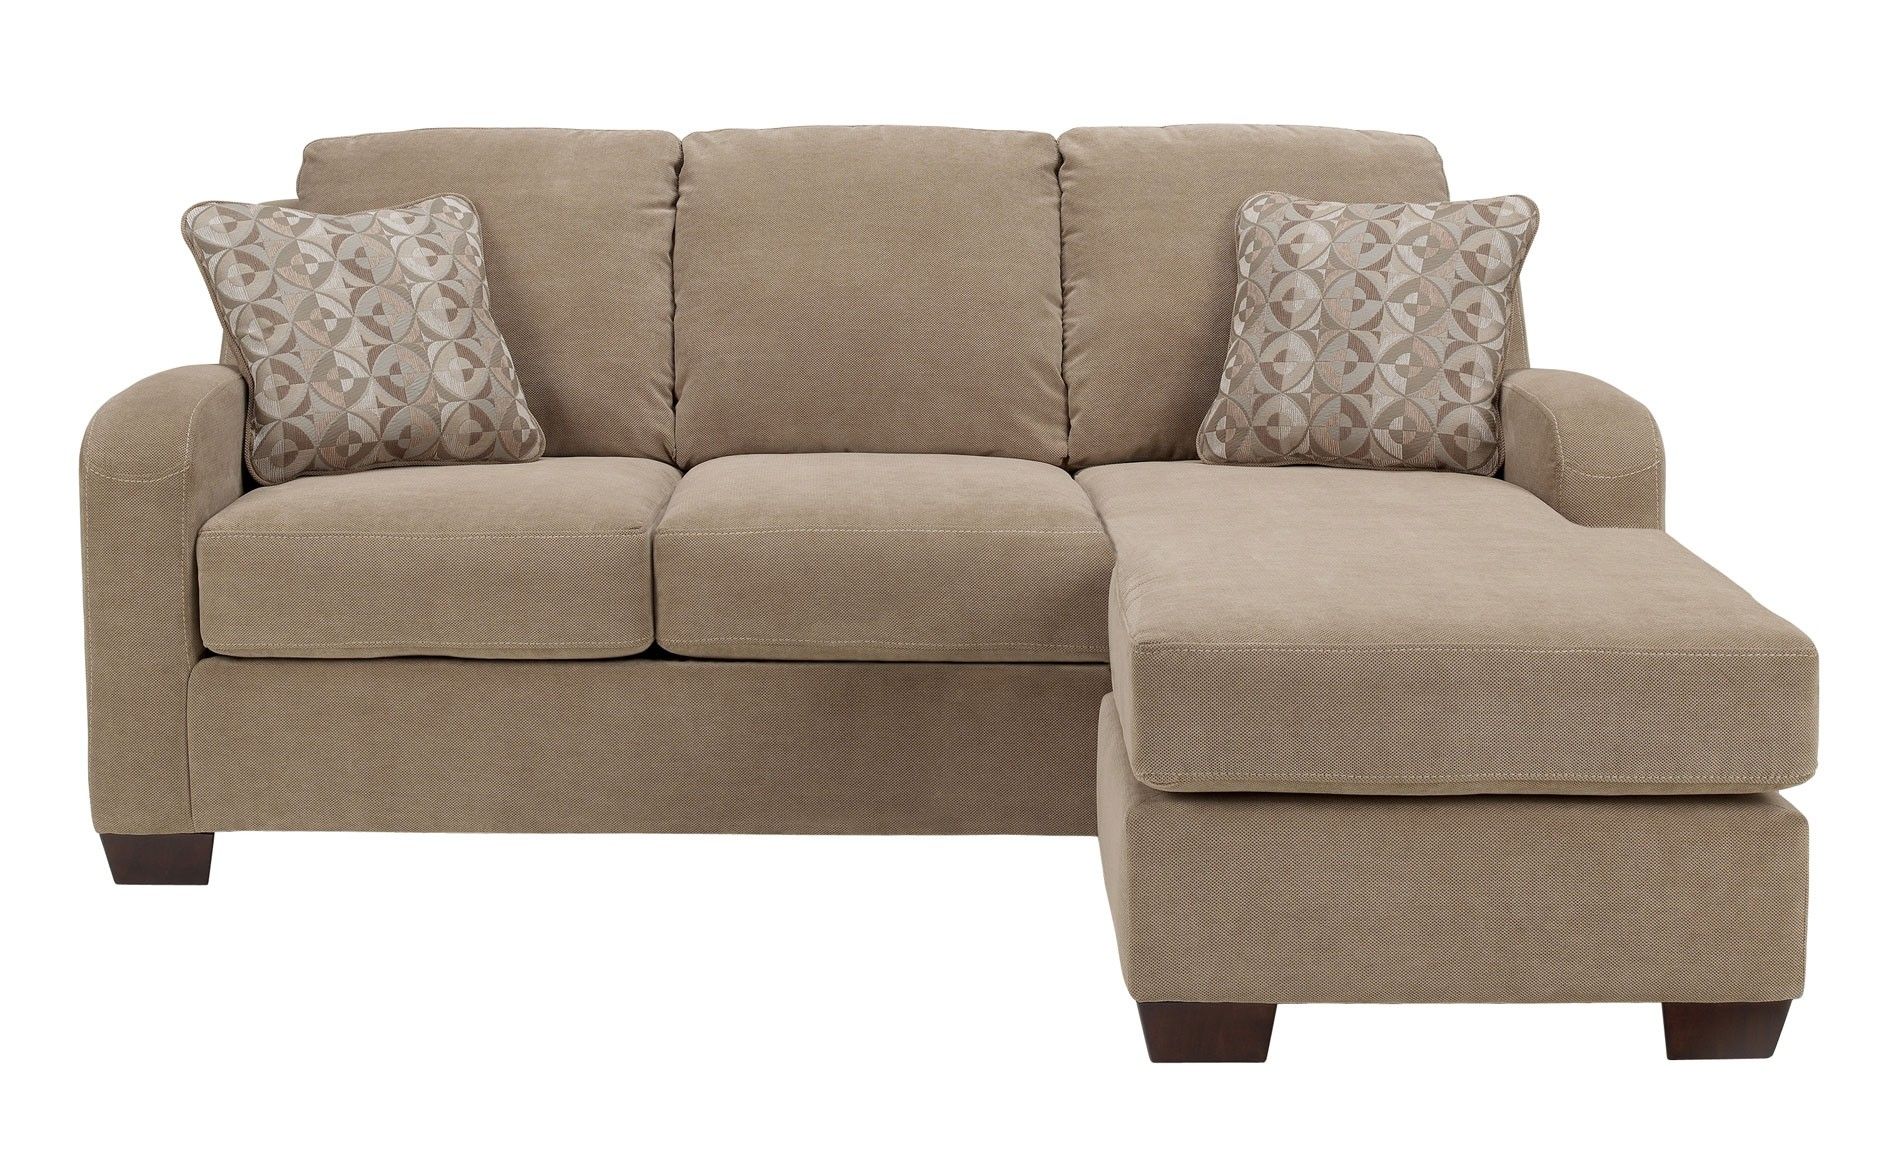 Ashley Circa Sofa Chaise Taupe Sectionals Raleigh Furniture Pertaining To Chaise Sofa Chairs (View 3 of 15)